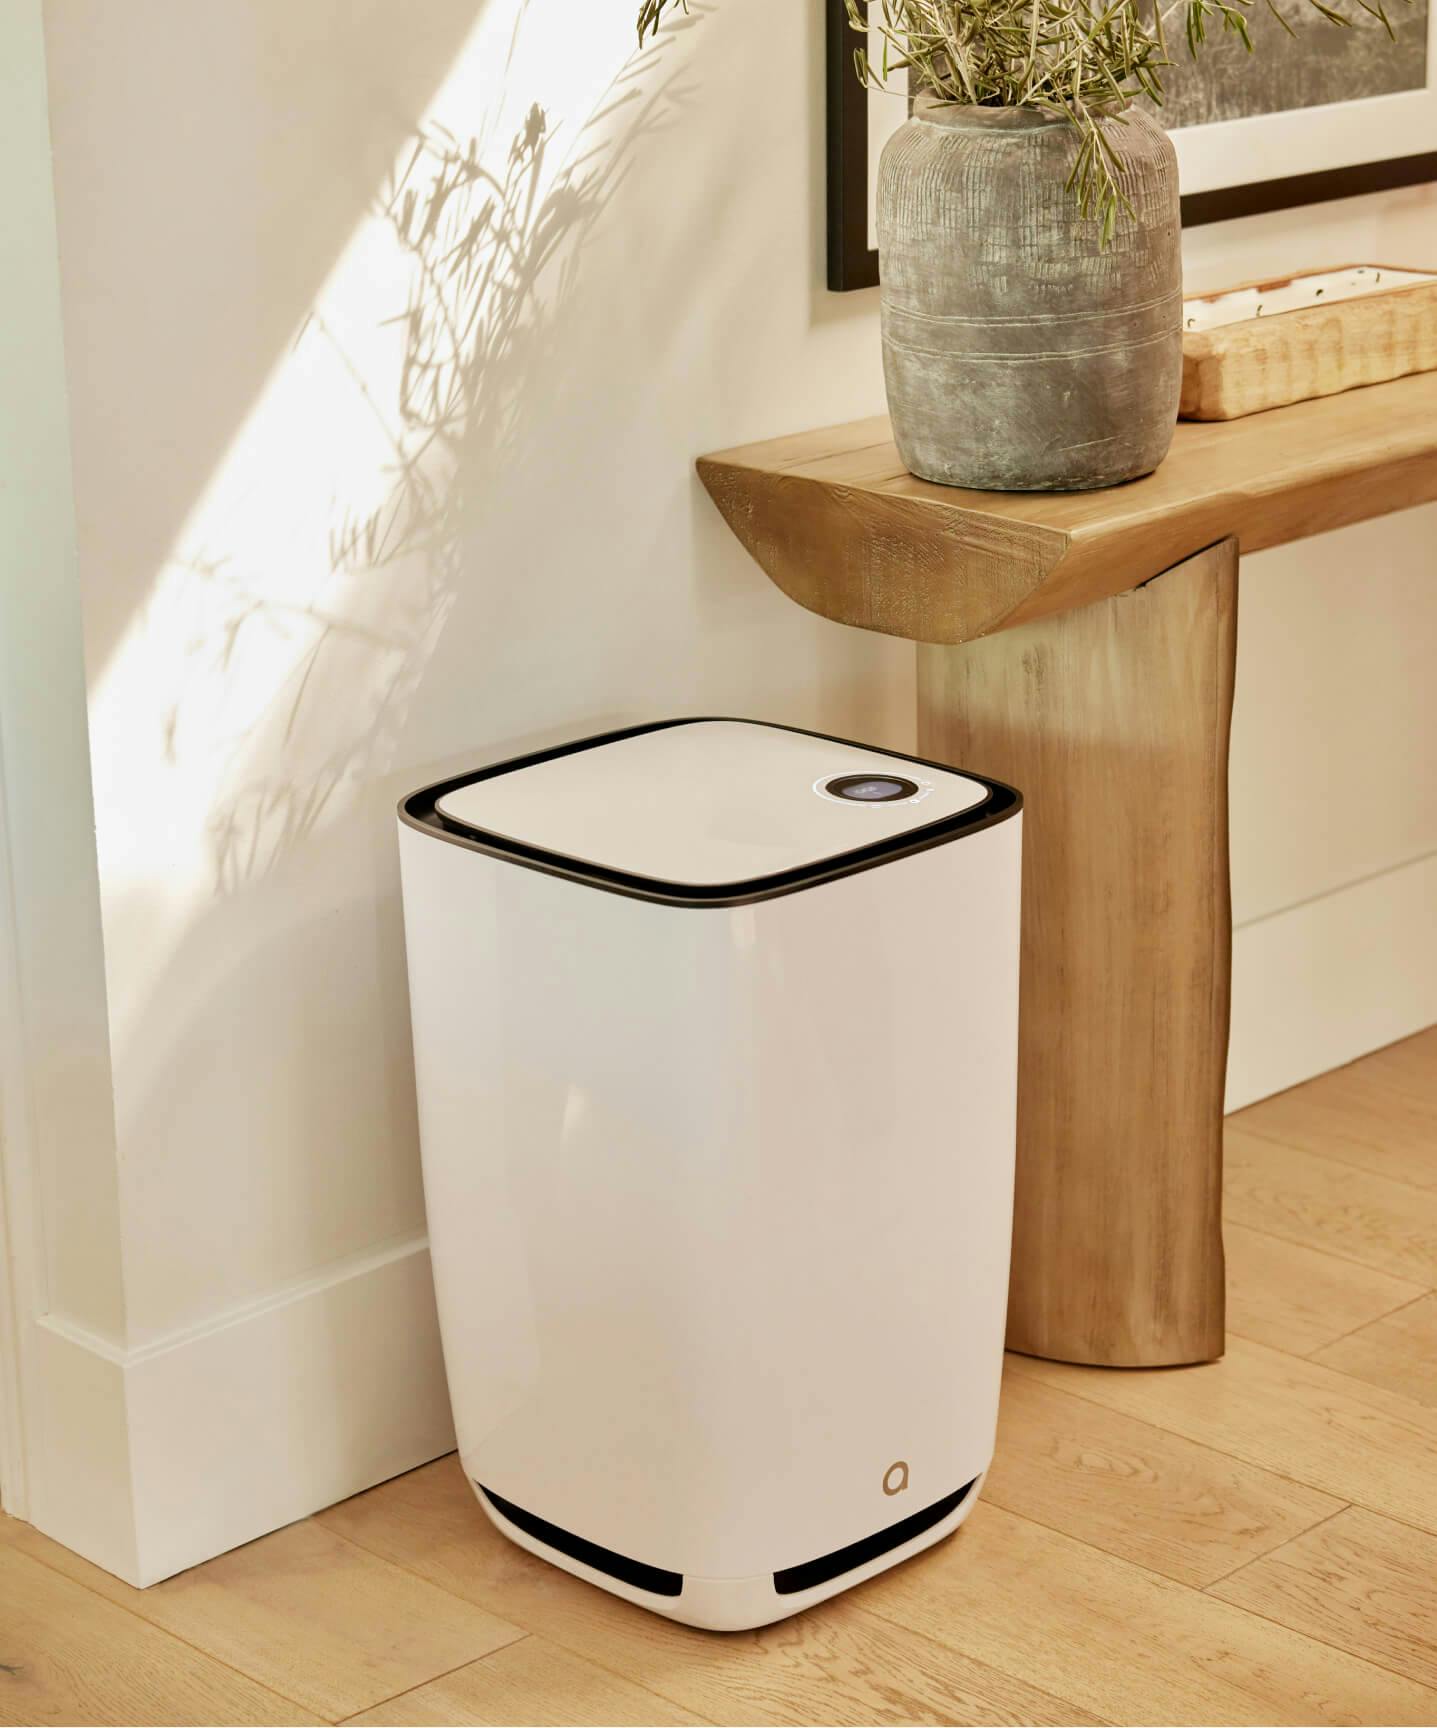 Automatically adjusts fan speed to react to the pollution in your space